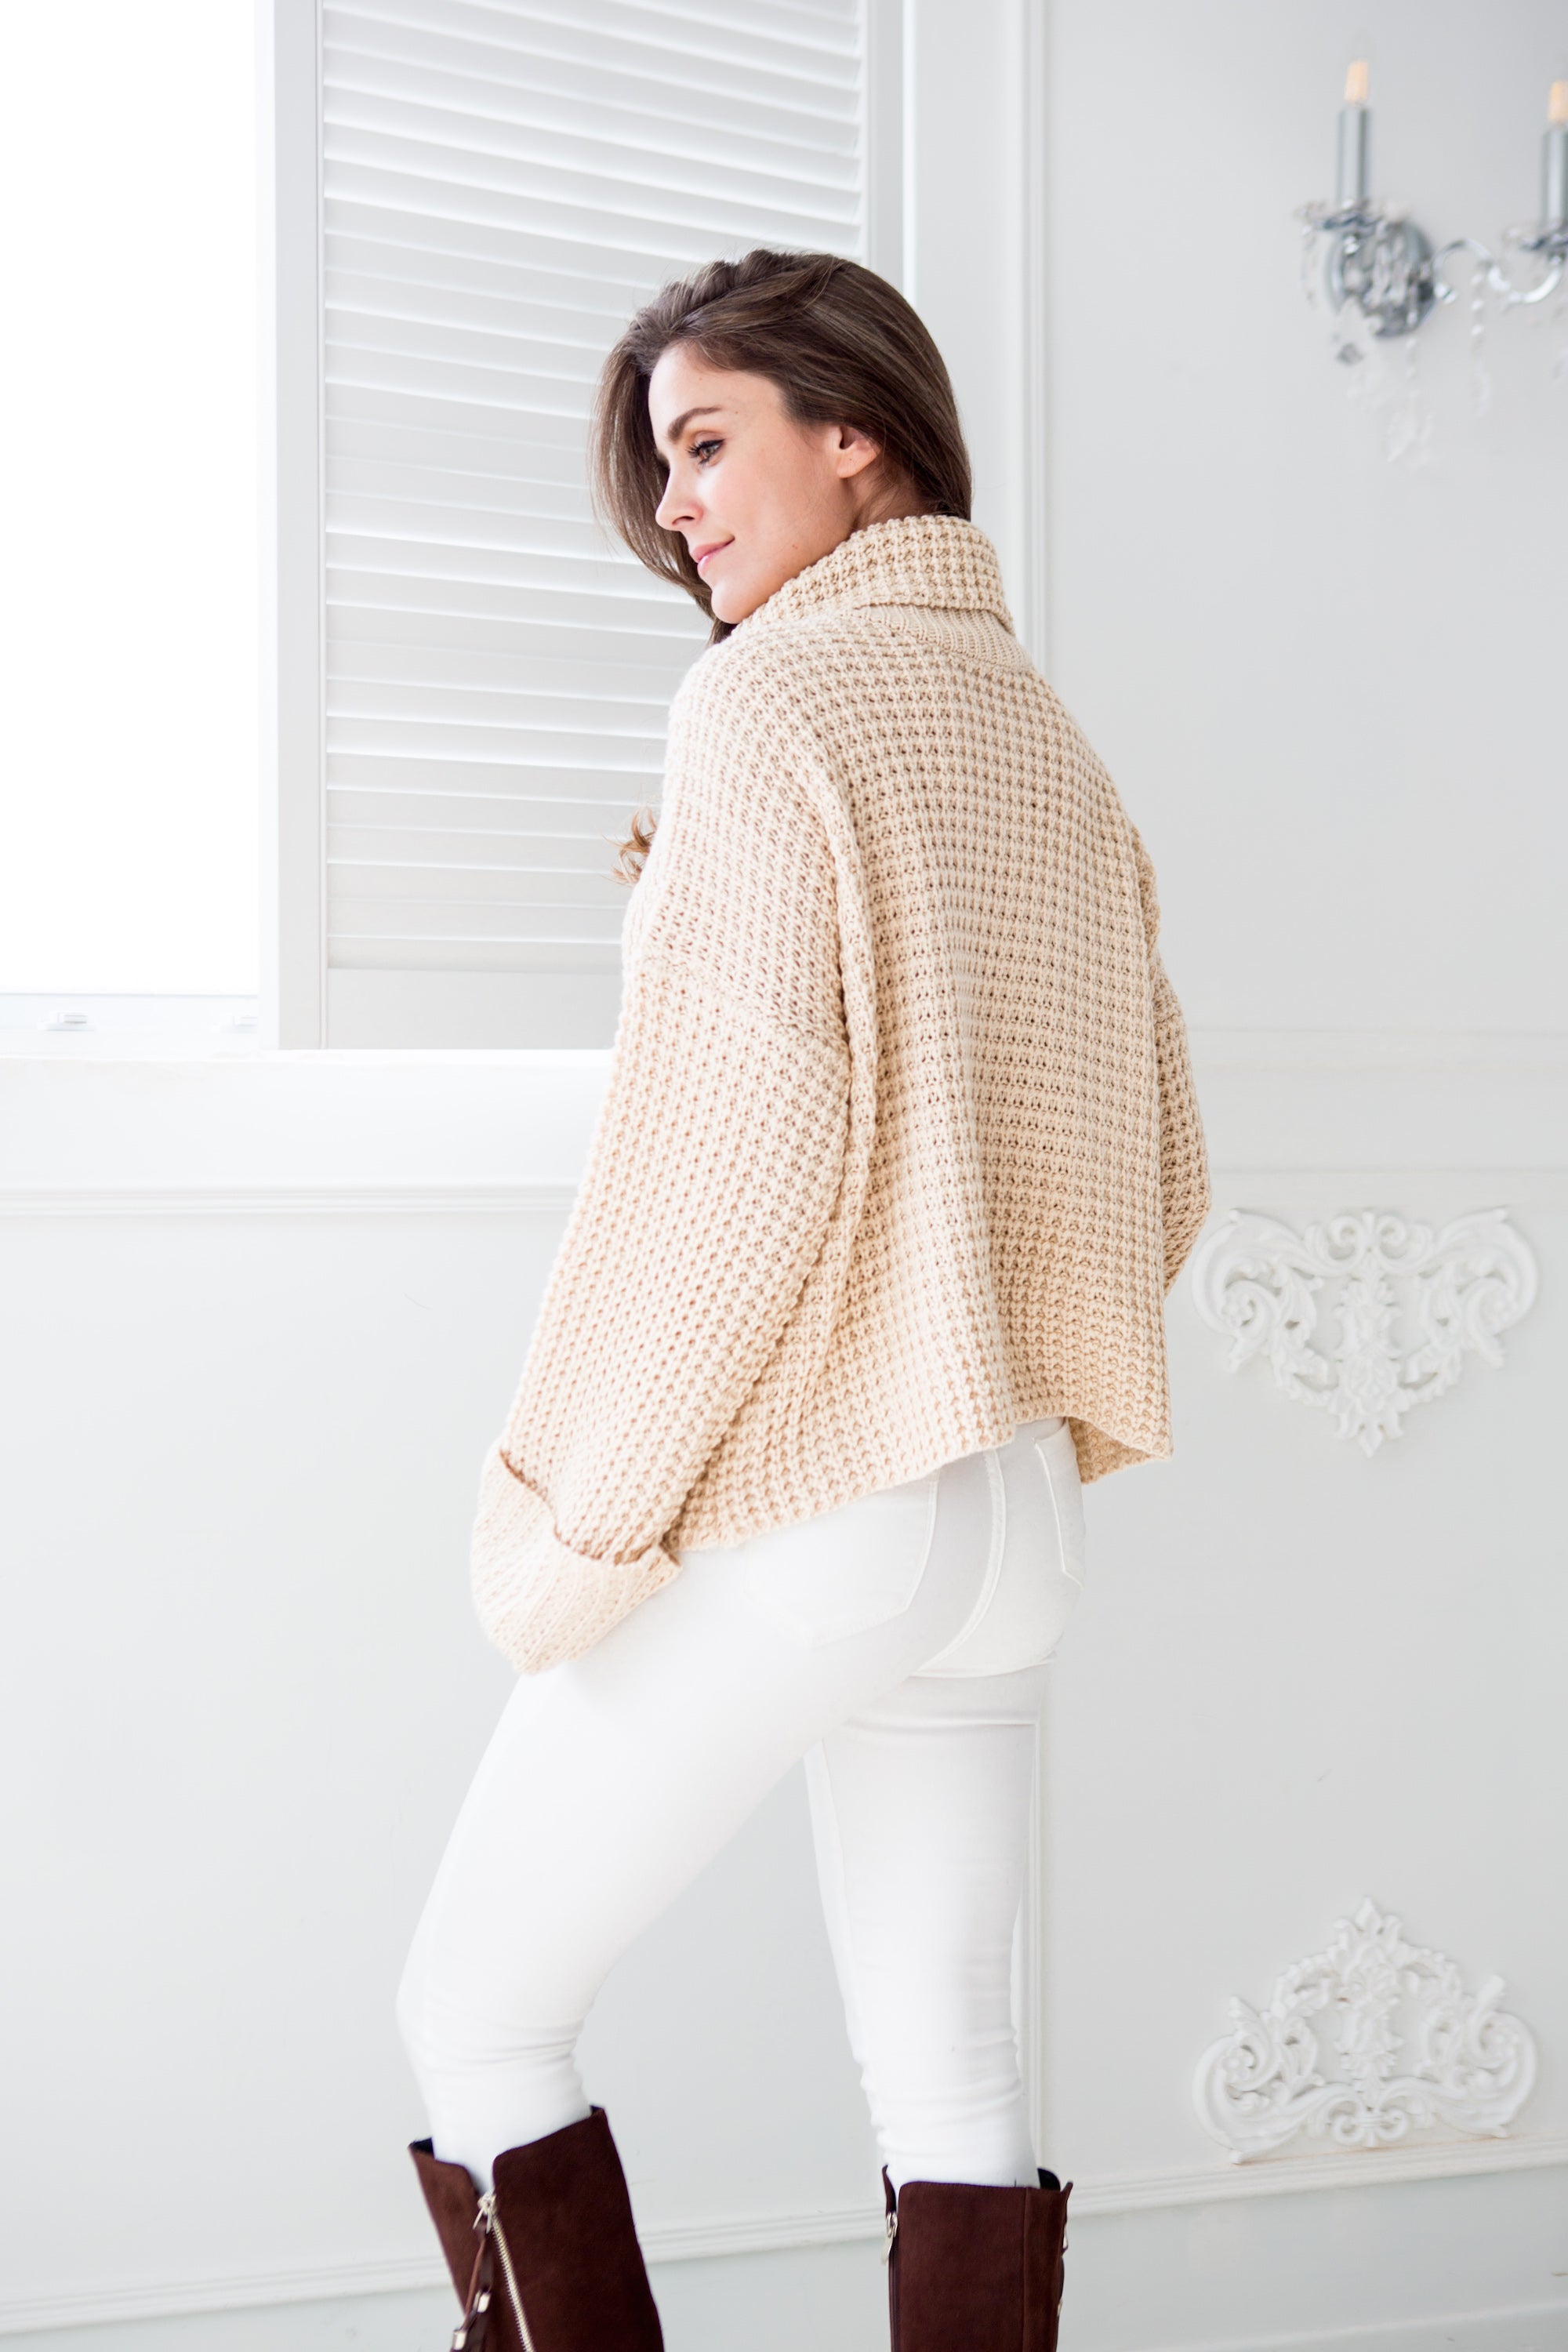 Athos Cropped Turtleneck Sweater in Oatmeal